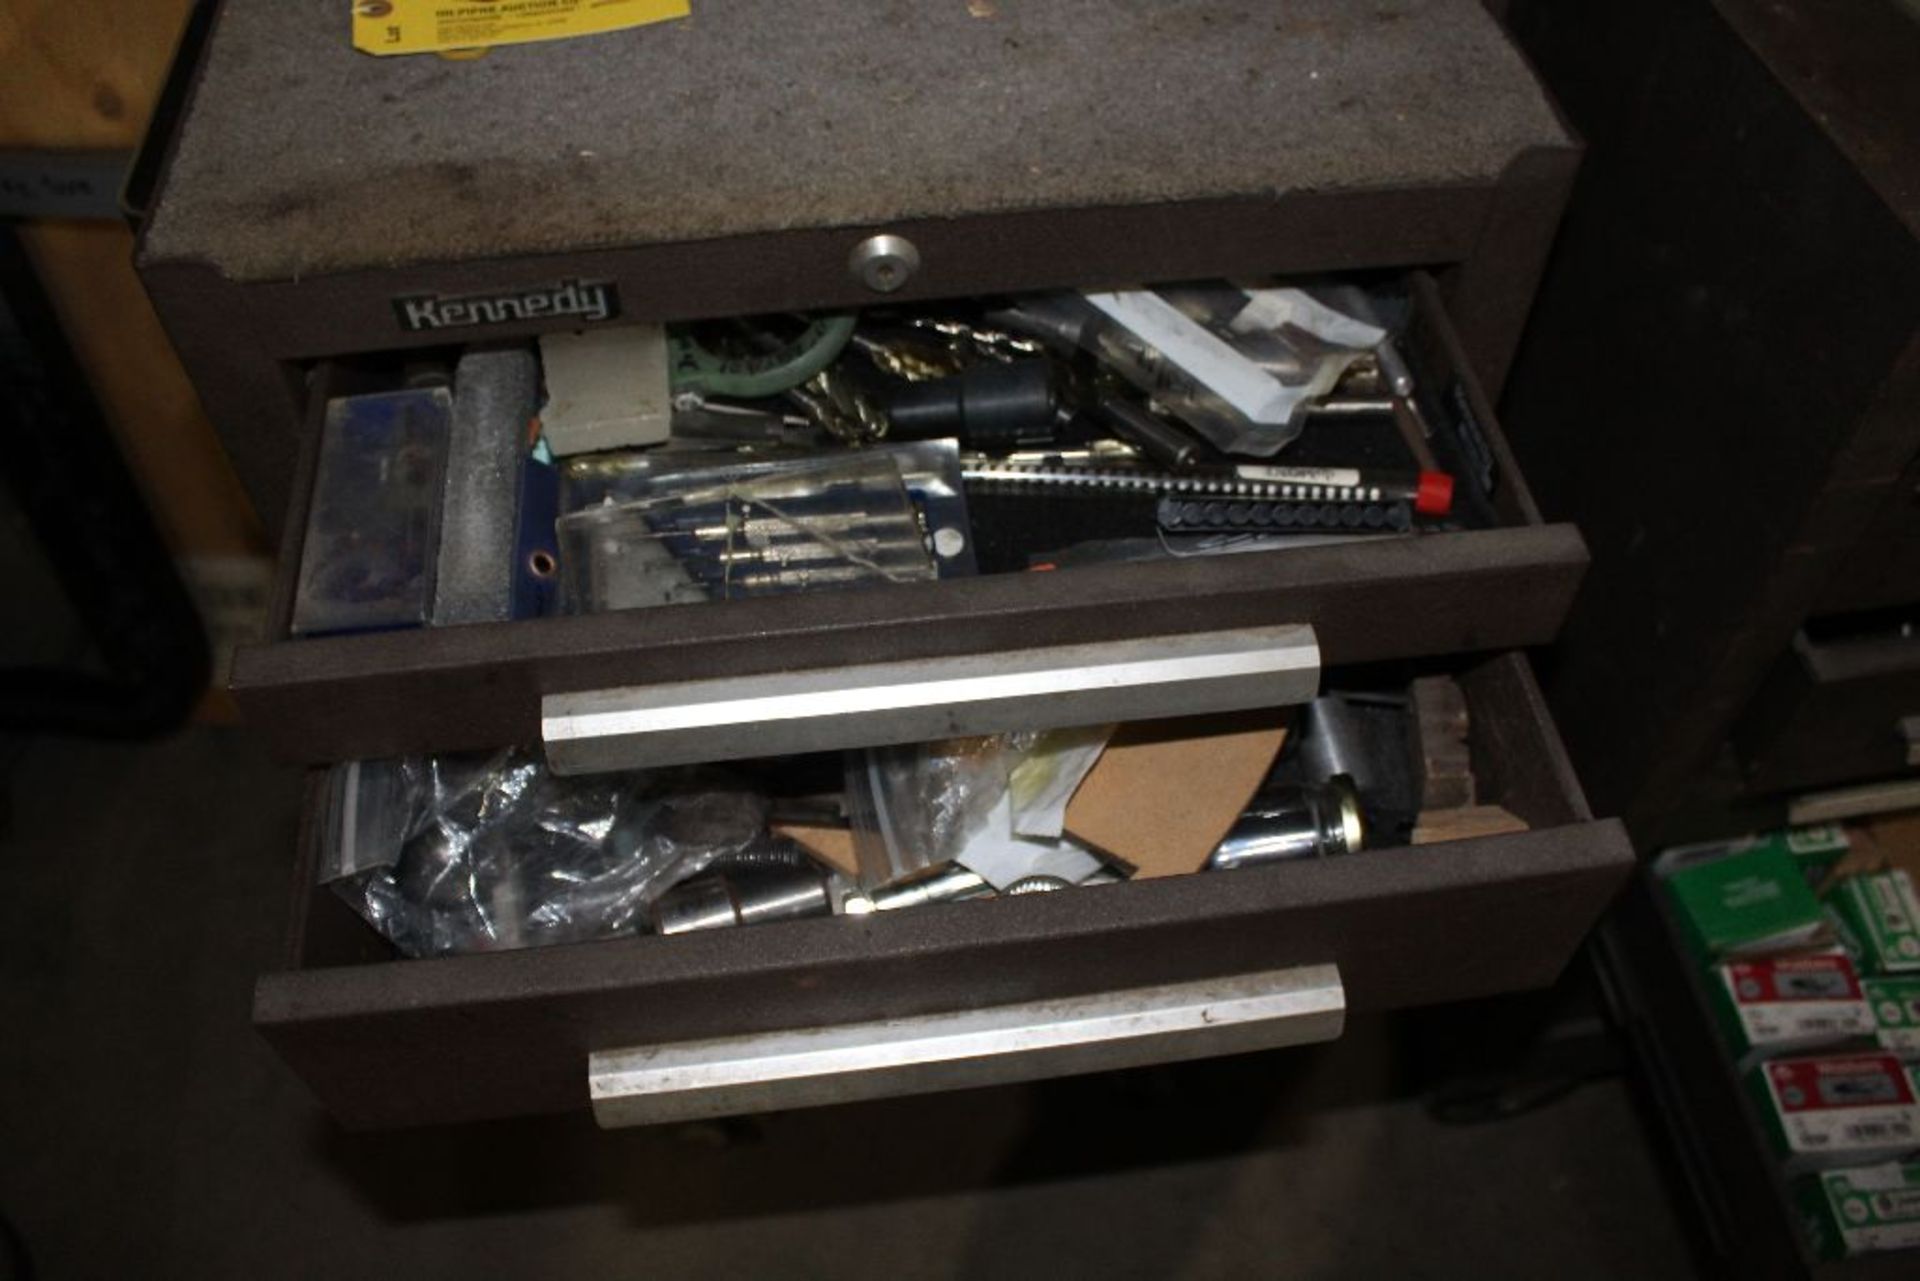 Kennedy 5 drawer tool chest; 20 1/2" x 14" x 35", rollaround cabinet, w/contents (tooling). - Image 2 of 2